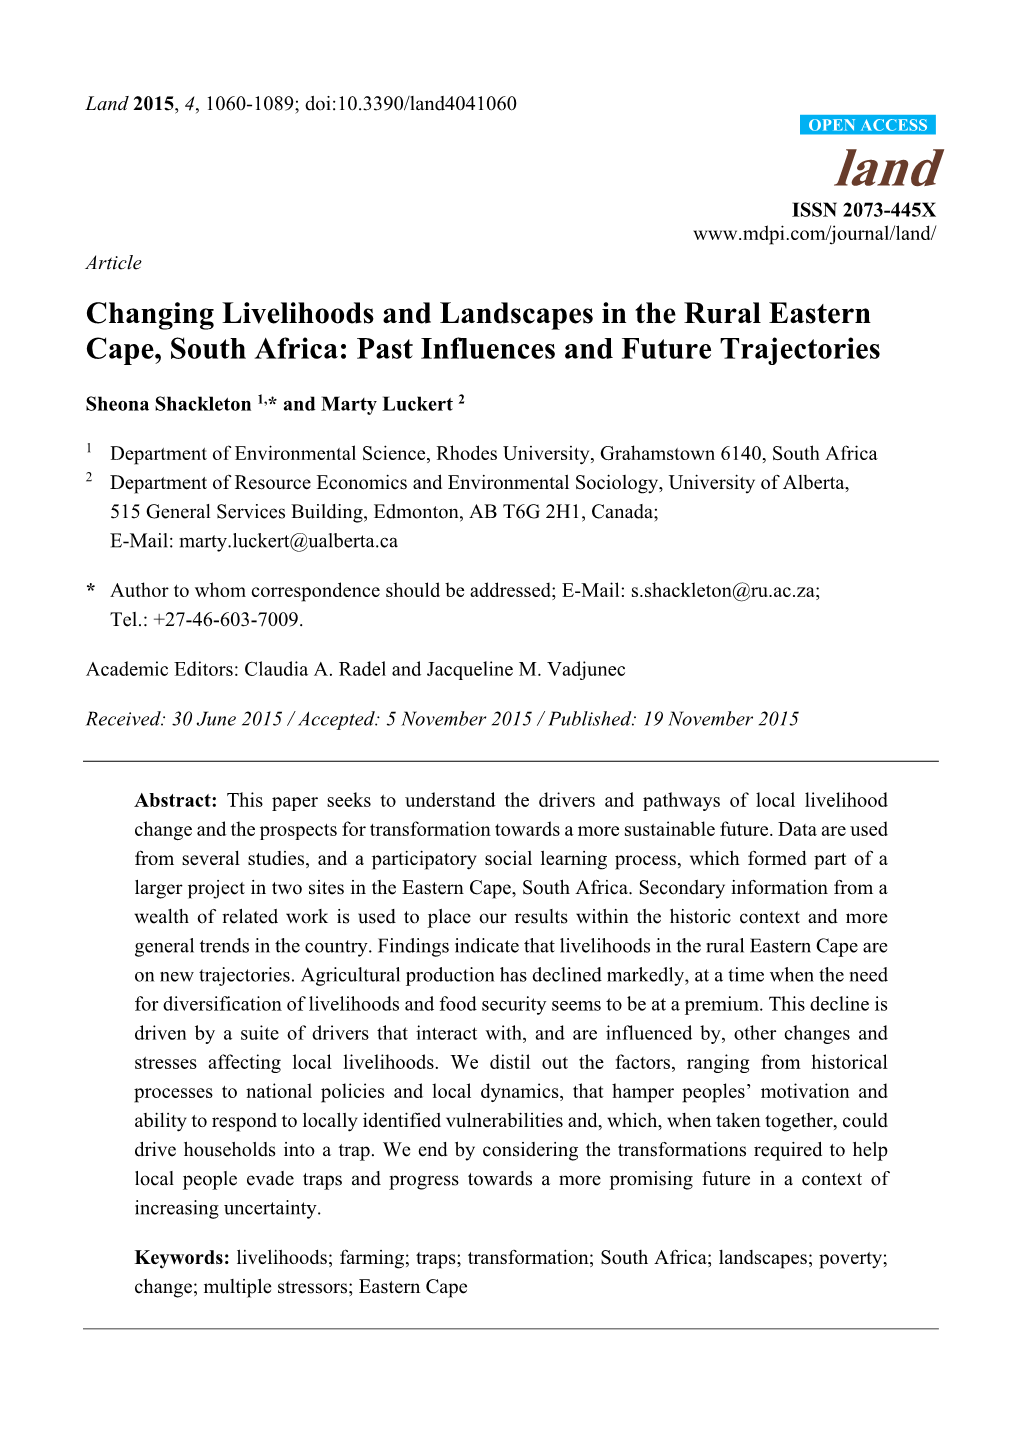 Changing Livelihoods and Landscapes in the Rural Eastern Cape, South Africa: Past Influences and Future Trajectories